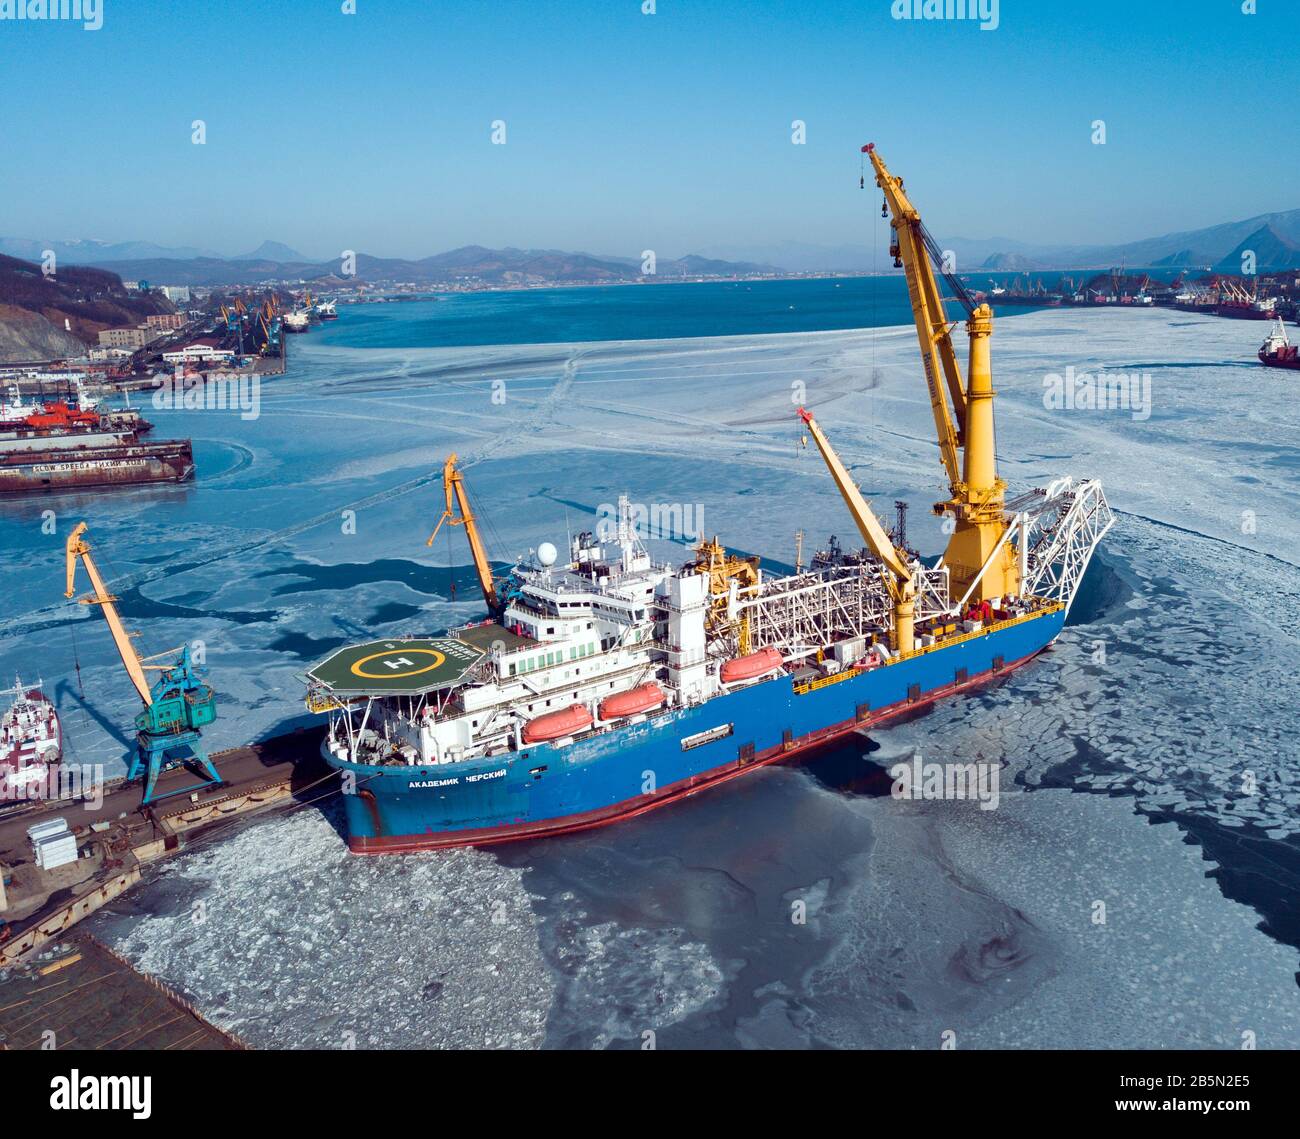 Nakhodka, Russia - February 06, 2020: Crane-laying pipe-laying vessel Academic Chersky former Jackson 18, a ship owned by Gazprom Stock Photo